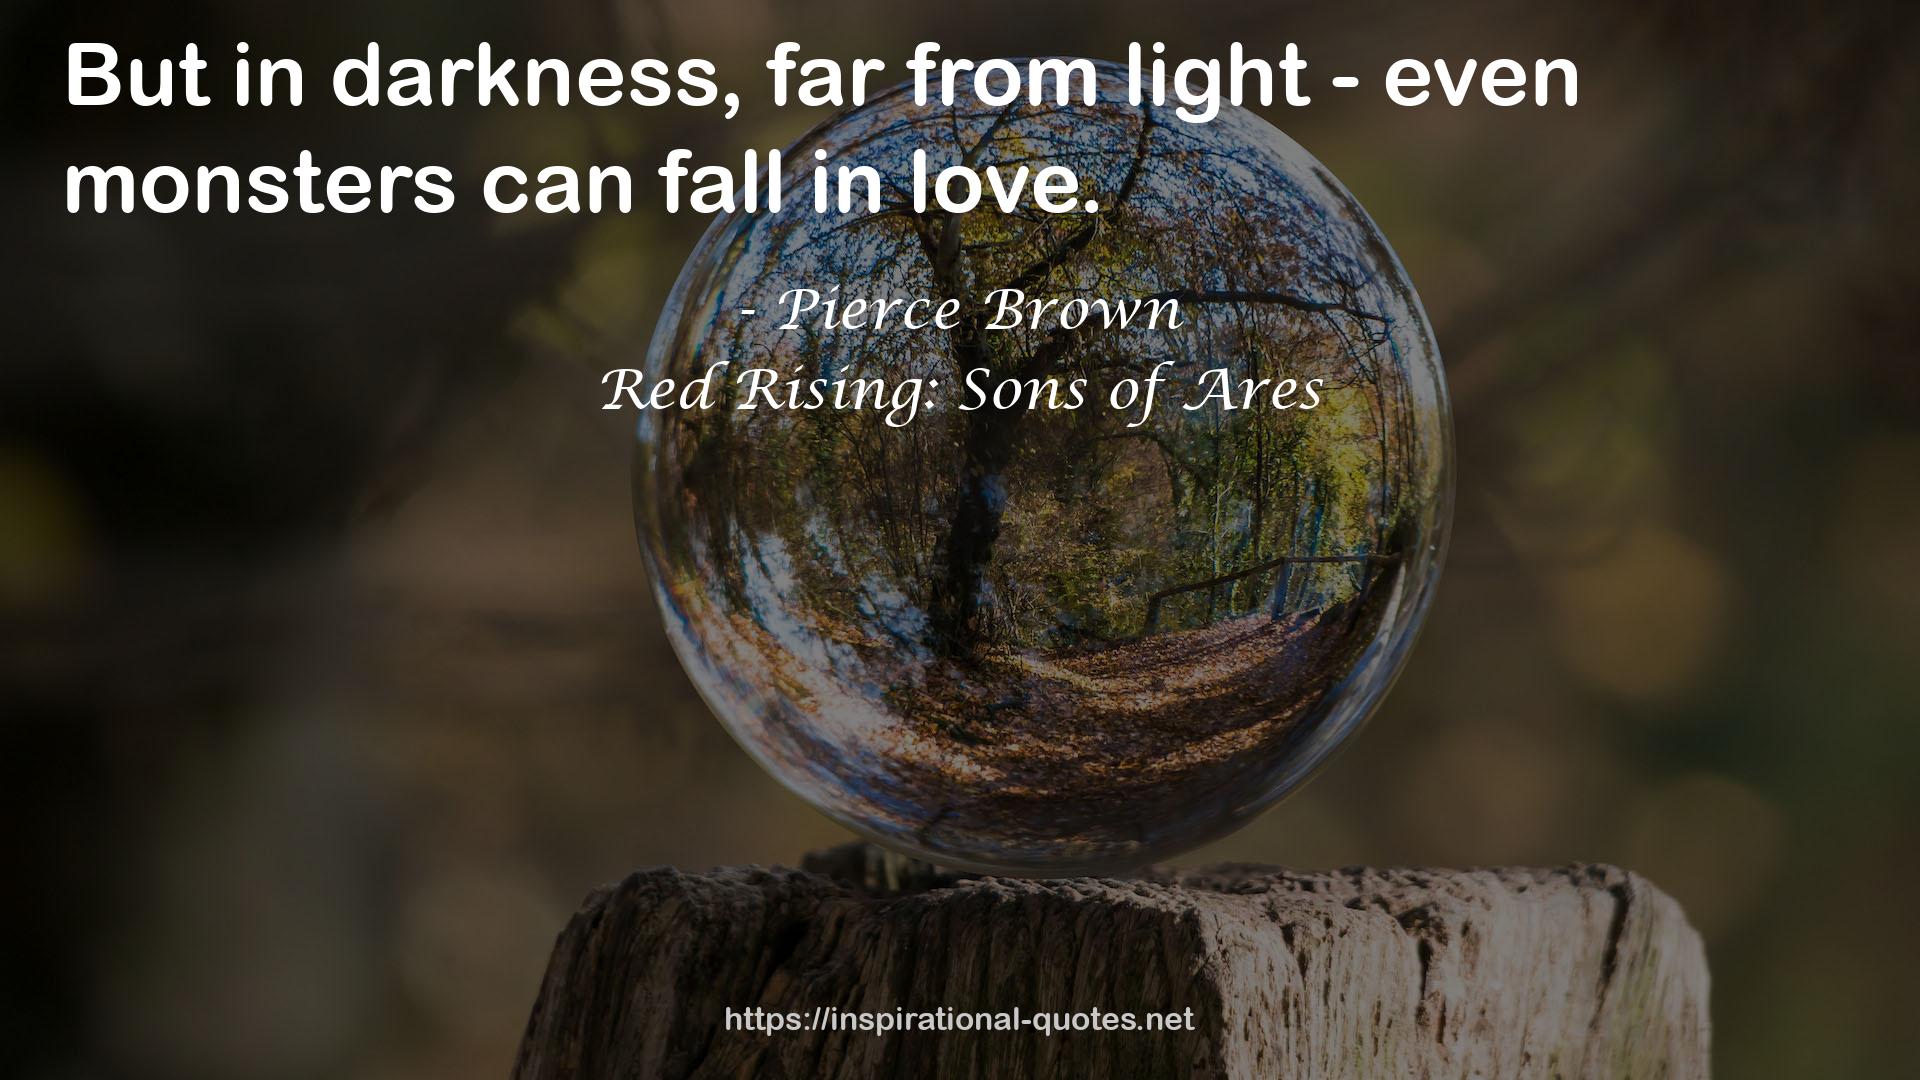 Red Rising: Sons of Ares QUOTES